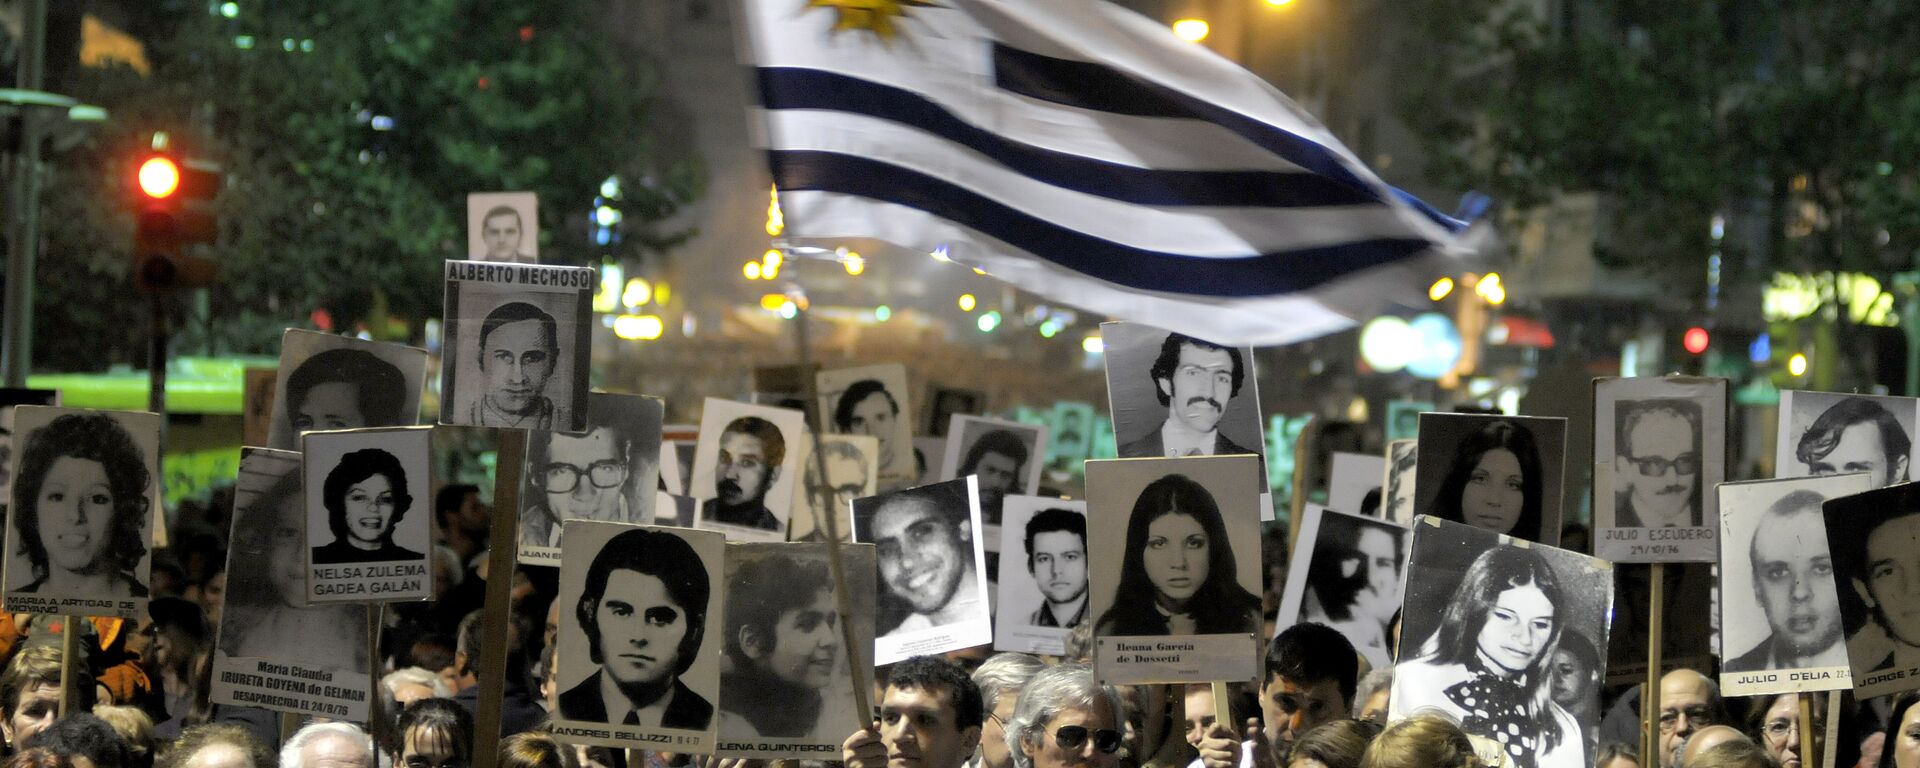 Demonstrators, one waving an Uruguayan flag, carry signs with images of people missing during Uruguay's 1973-85 dictatorship during a march in Montevideo, Uruguay - Sputnik Mundo, 1920, 04.05.2023